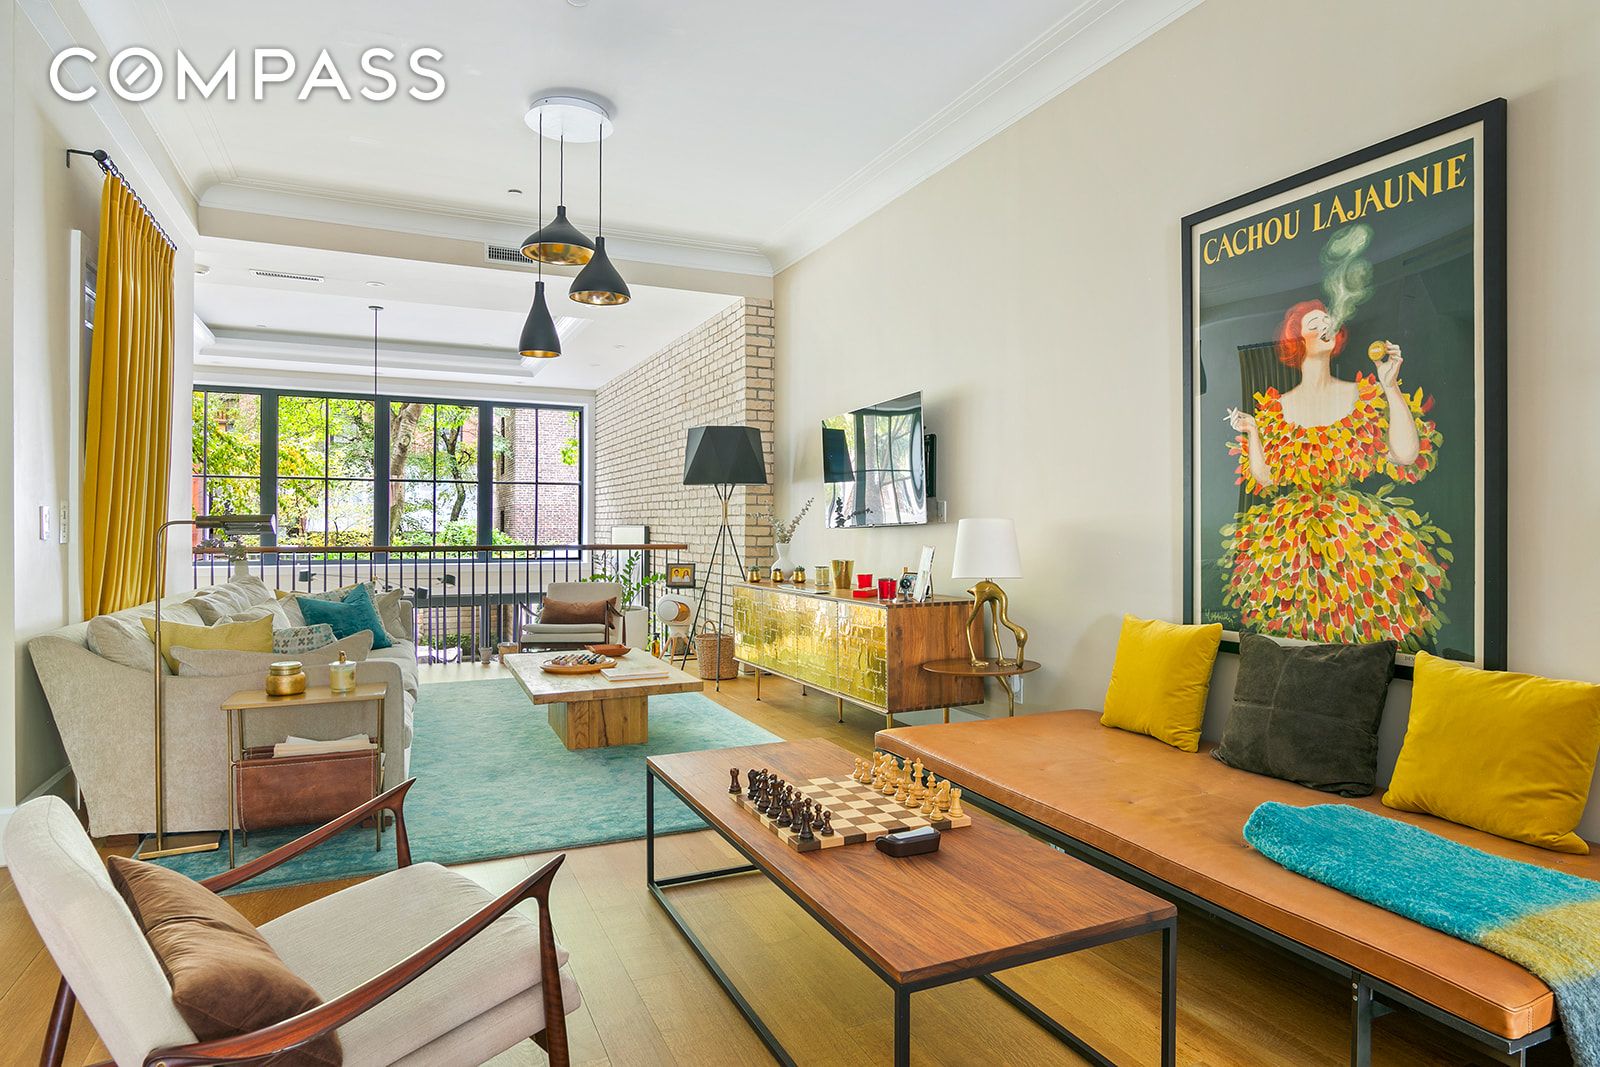 152 West 13th Street, West Village, Downtown, NYC - 5 Bedrooms  
4.5 Bathrooms  
8 Rooms - 